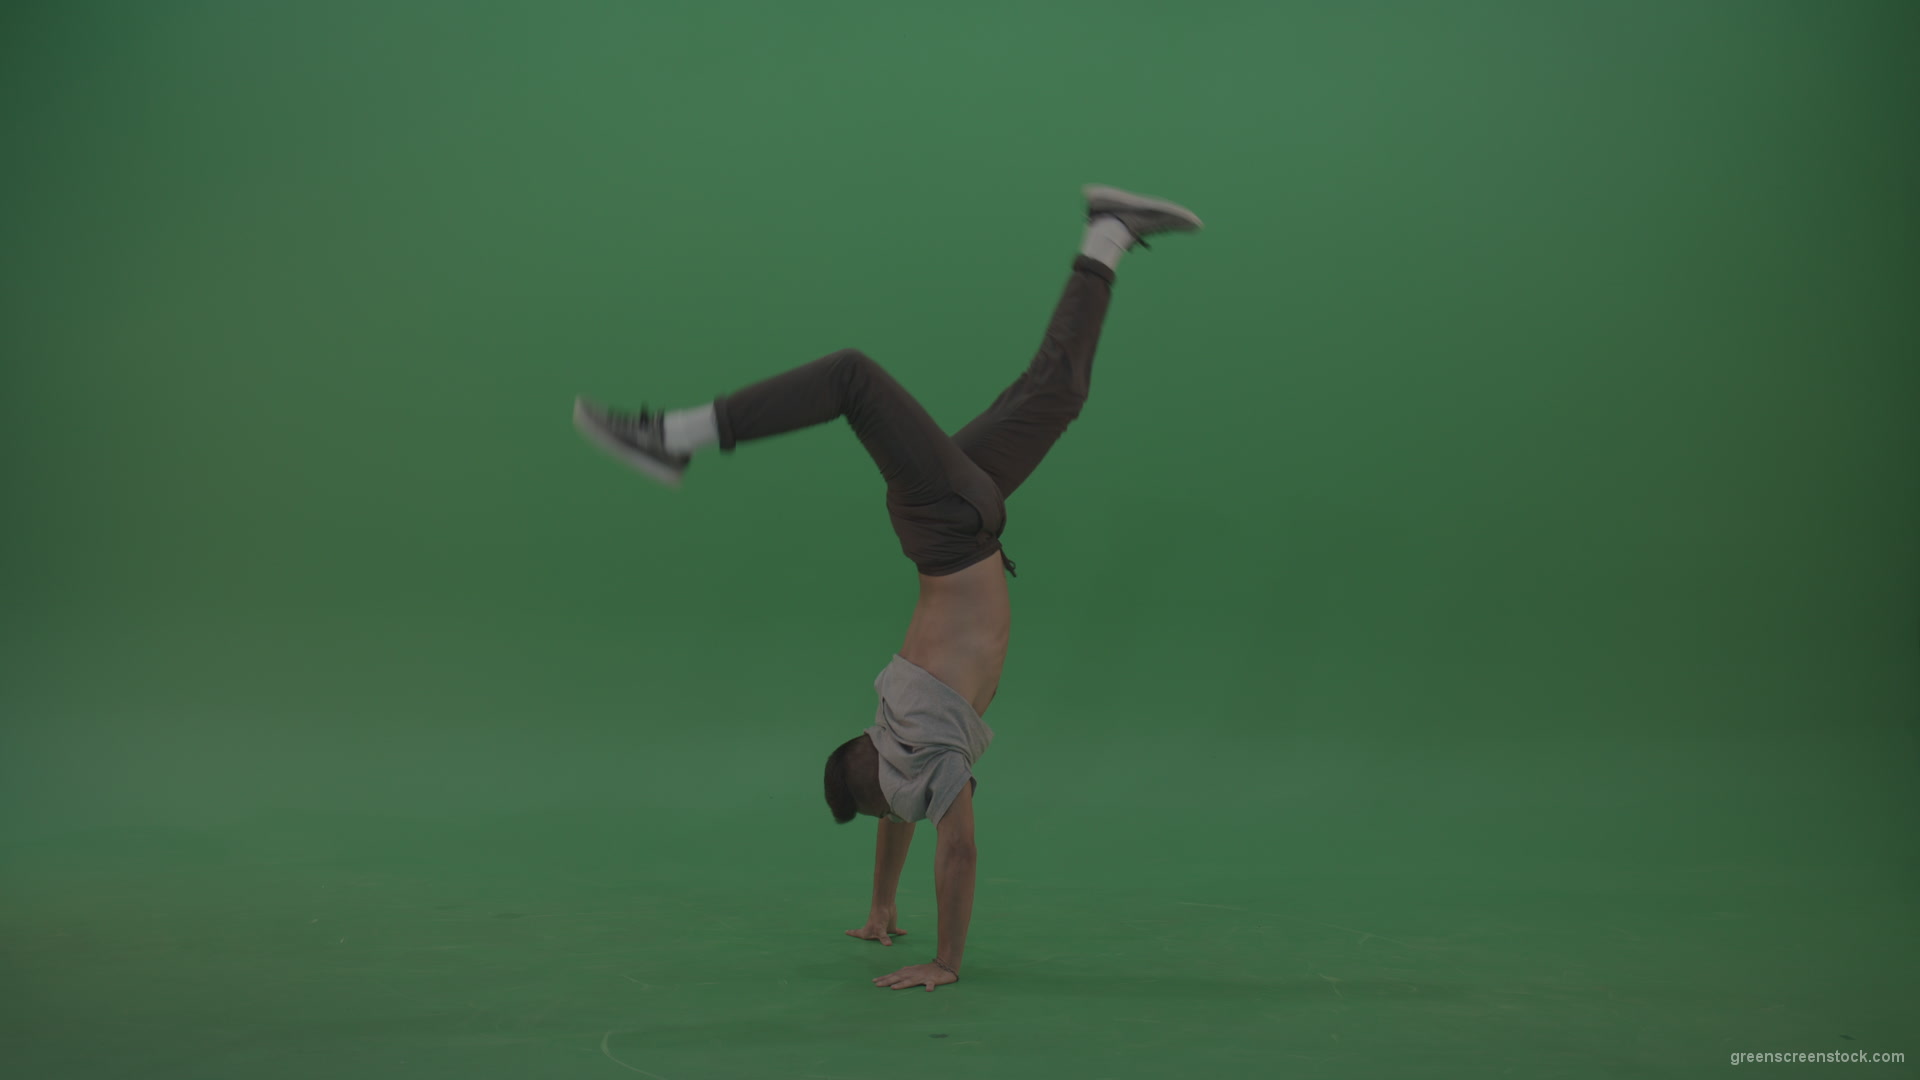 Man-dancing-and-staying-on-hand-on-the-green-floor-green-screen_005 Green Screen Stock